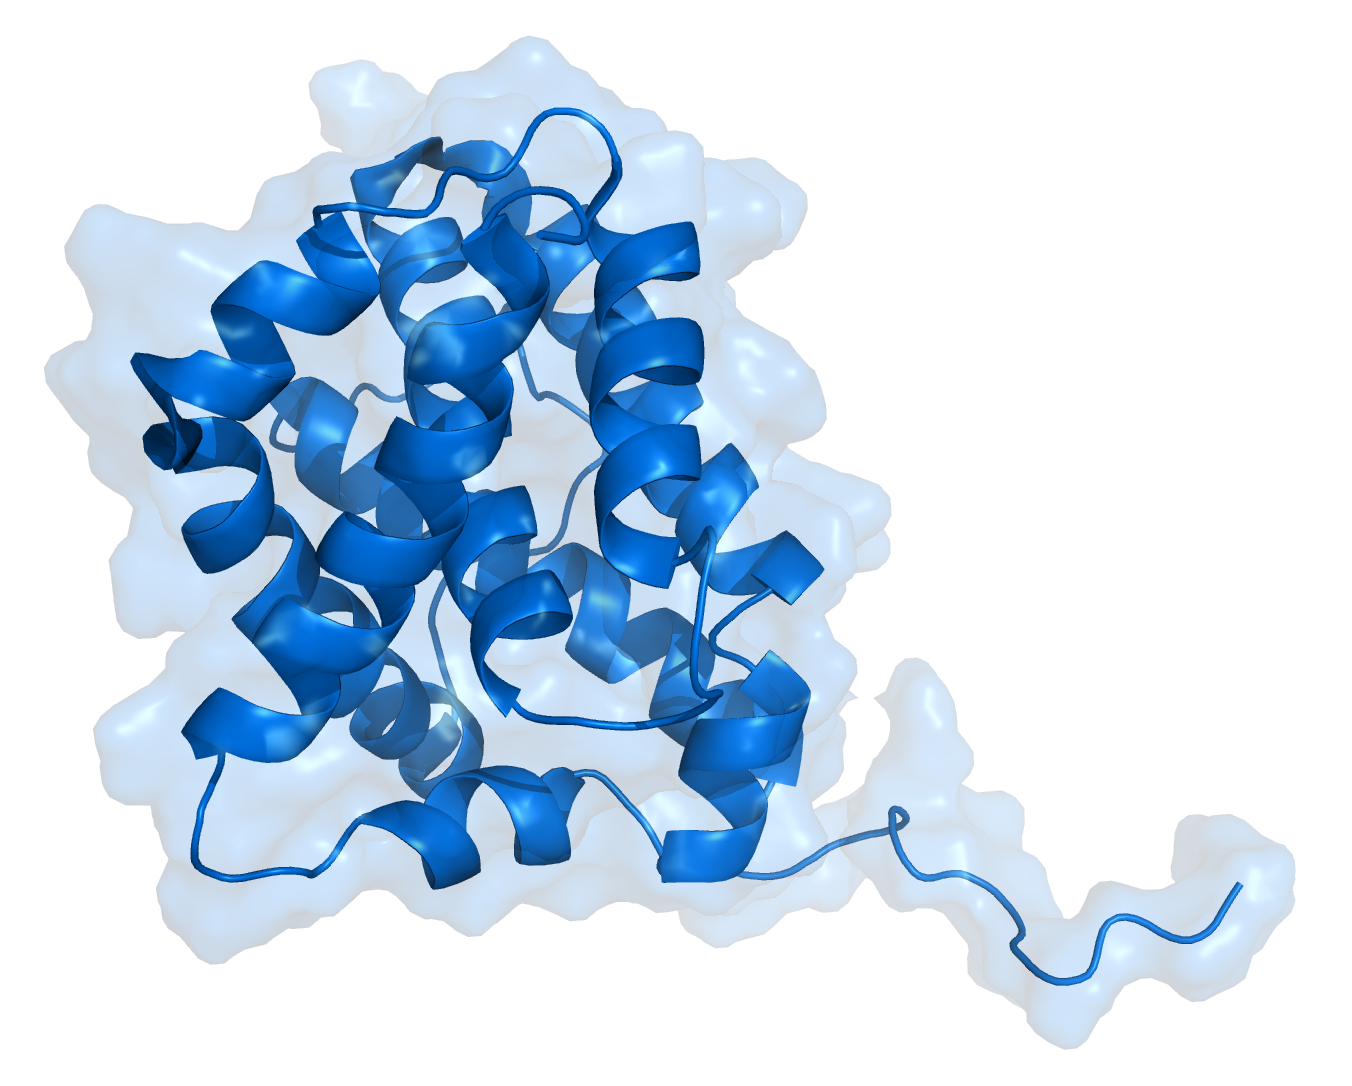 File:BAX protein 1F16.png